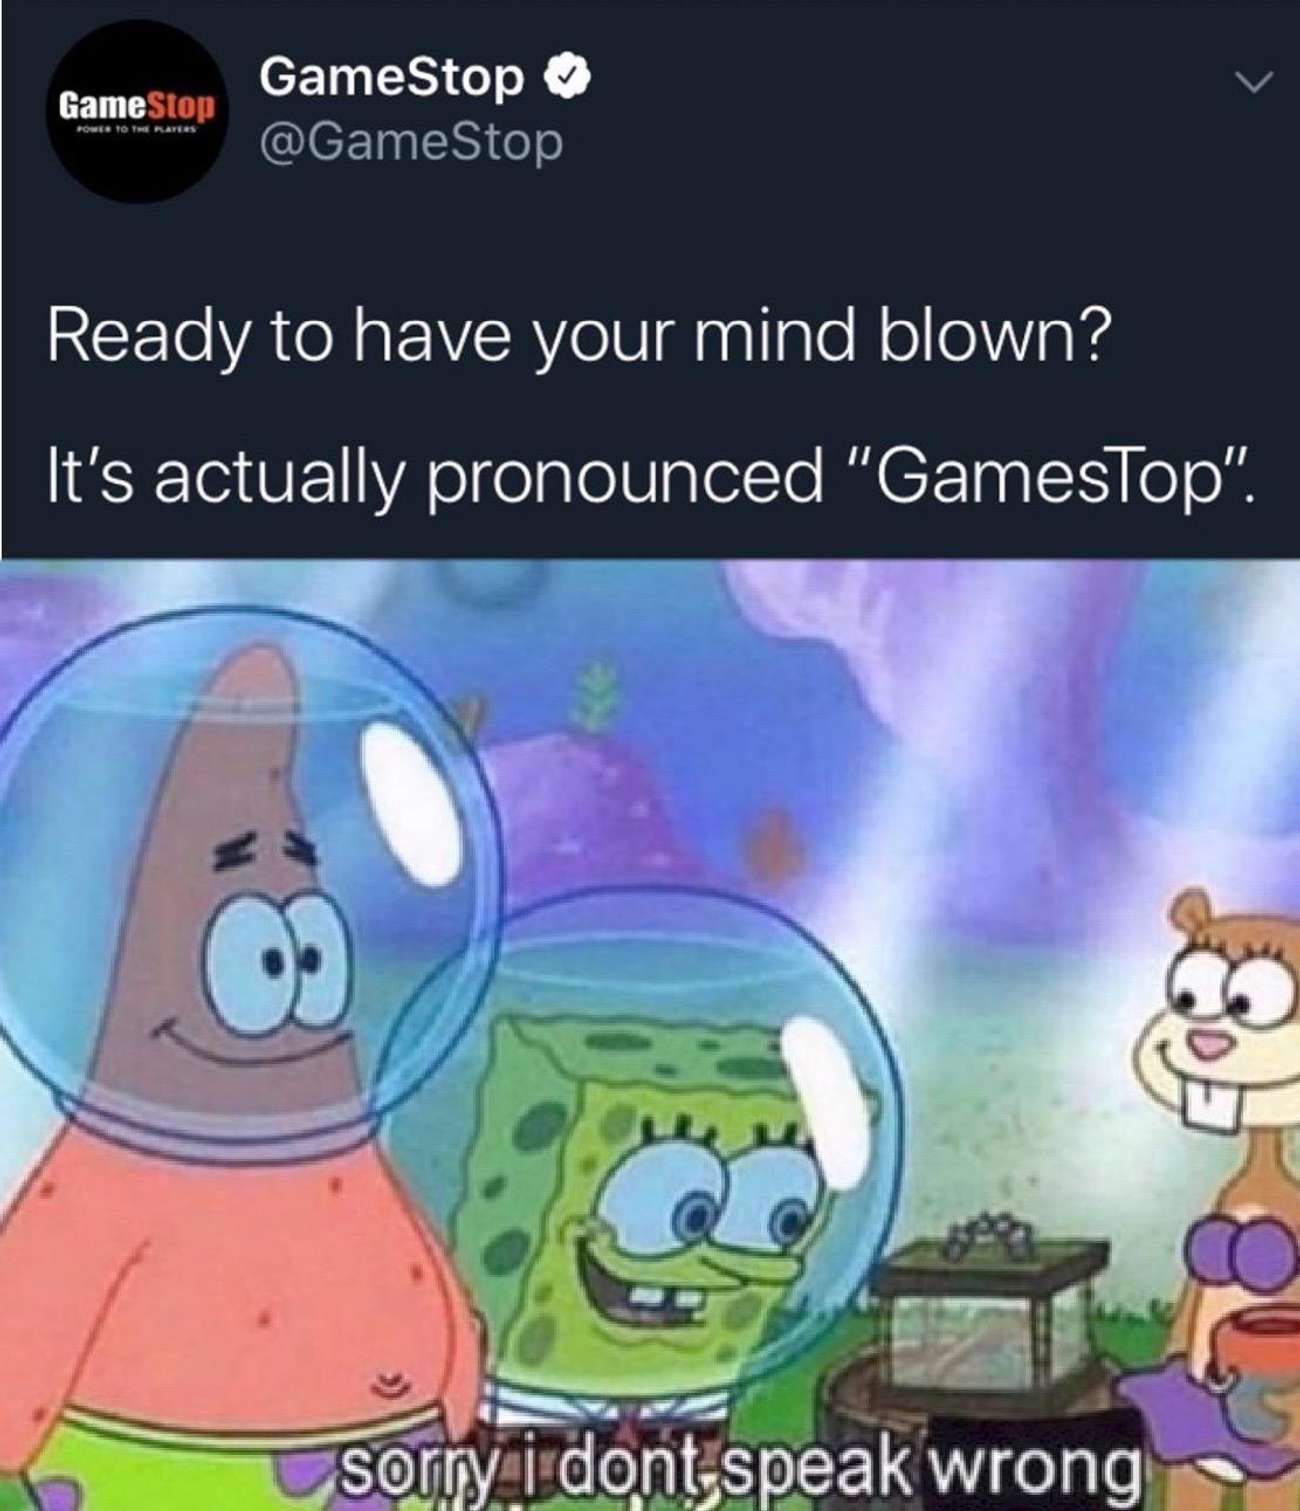 sumimasen nani ga fakku - GameStop GameStop Home To The Rates Ready to have your mind blown? It's actually pronounced "GamesTop". sorry i dontspeak wrong